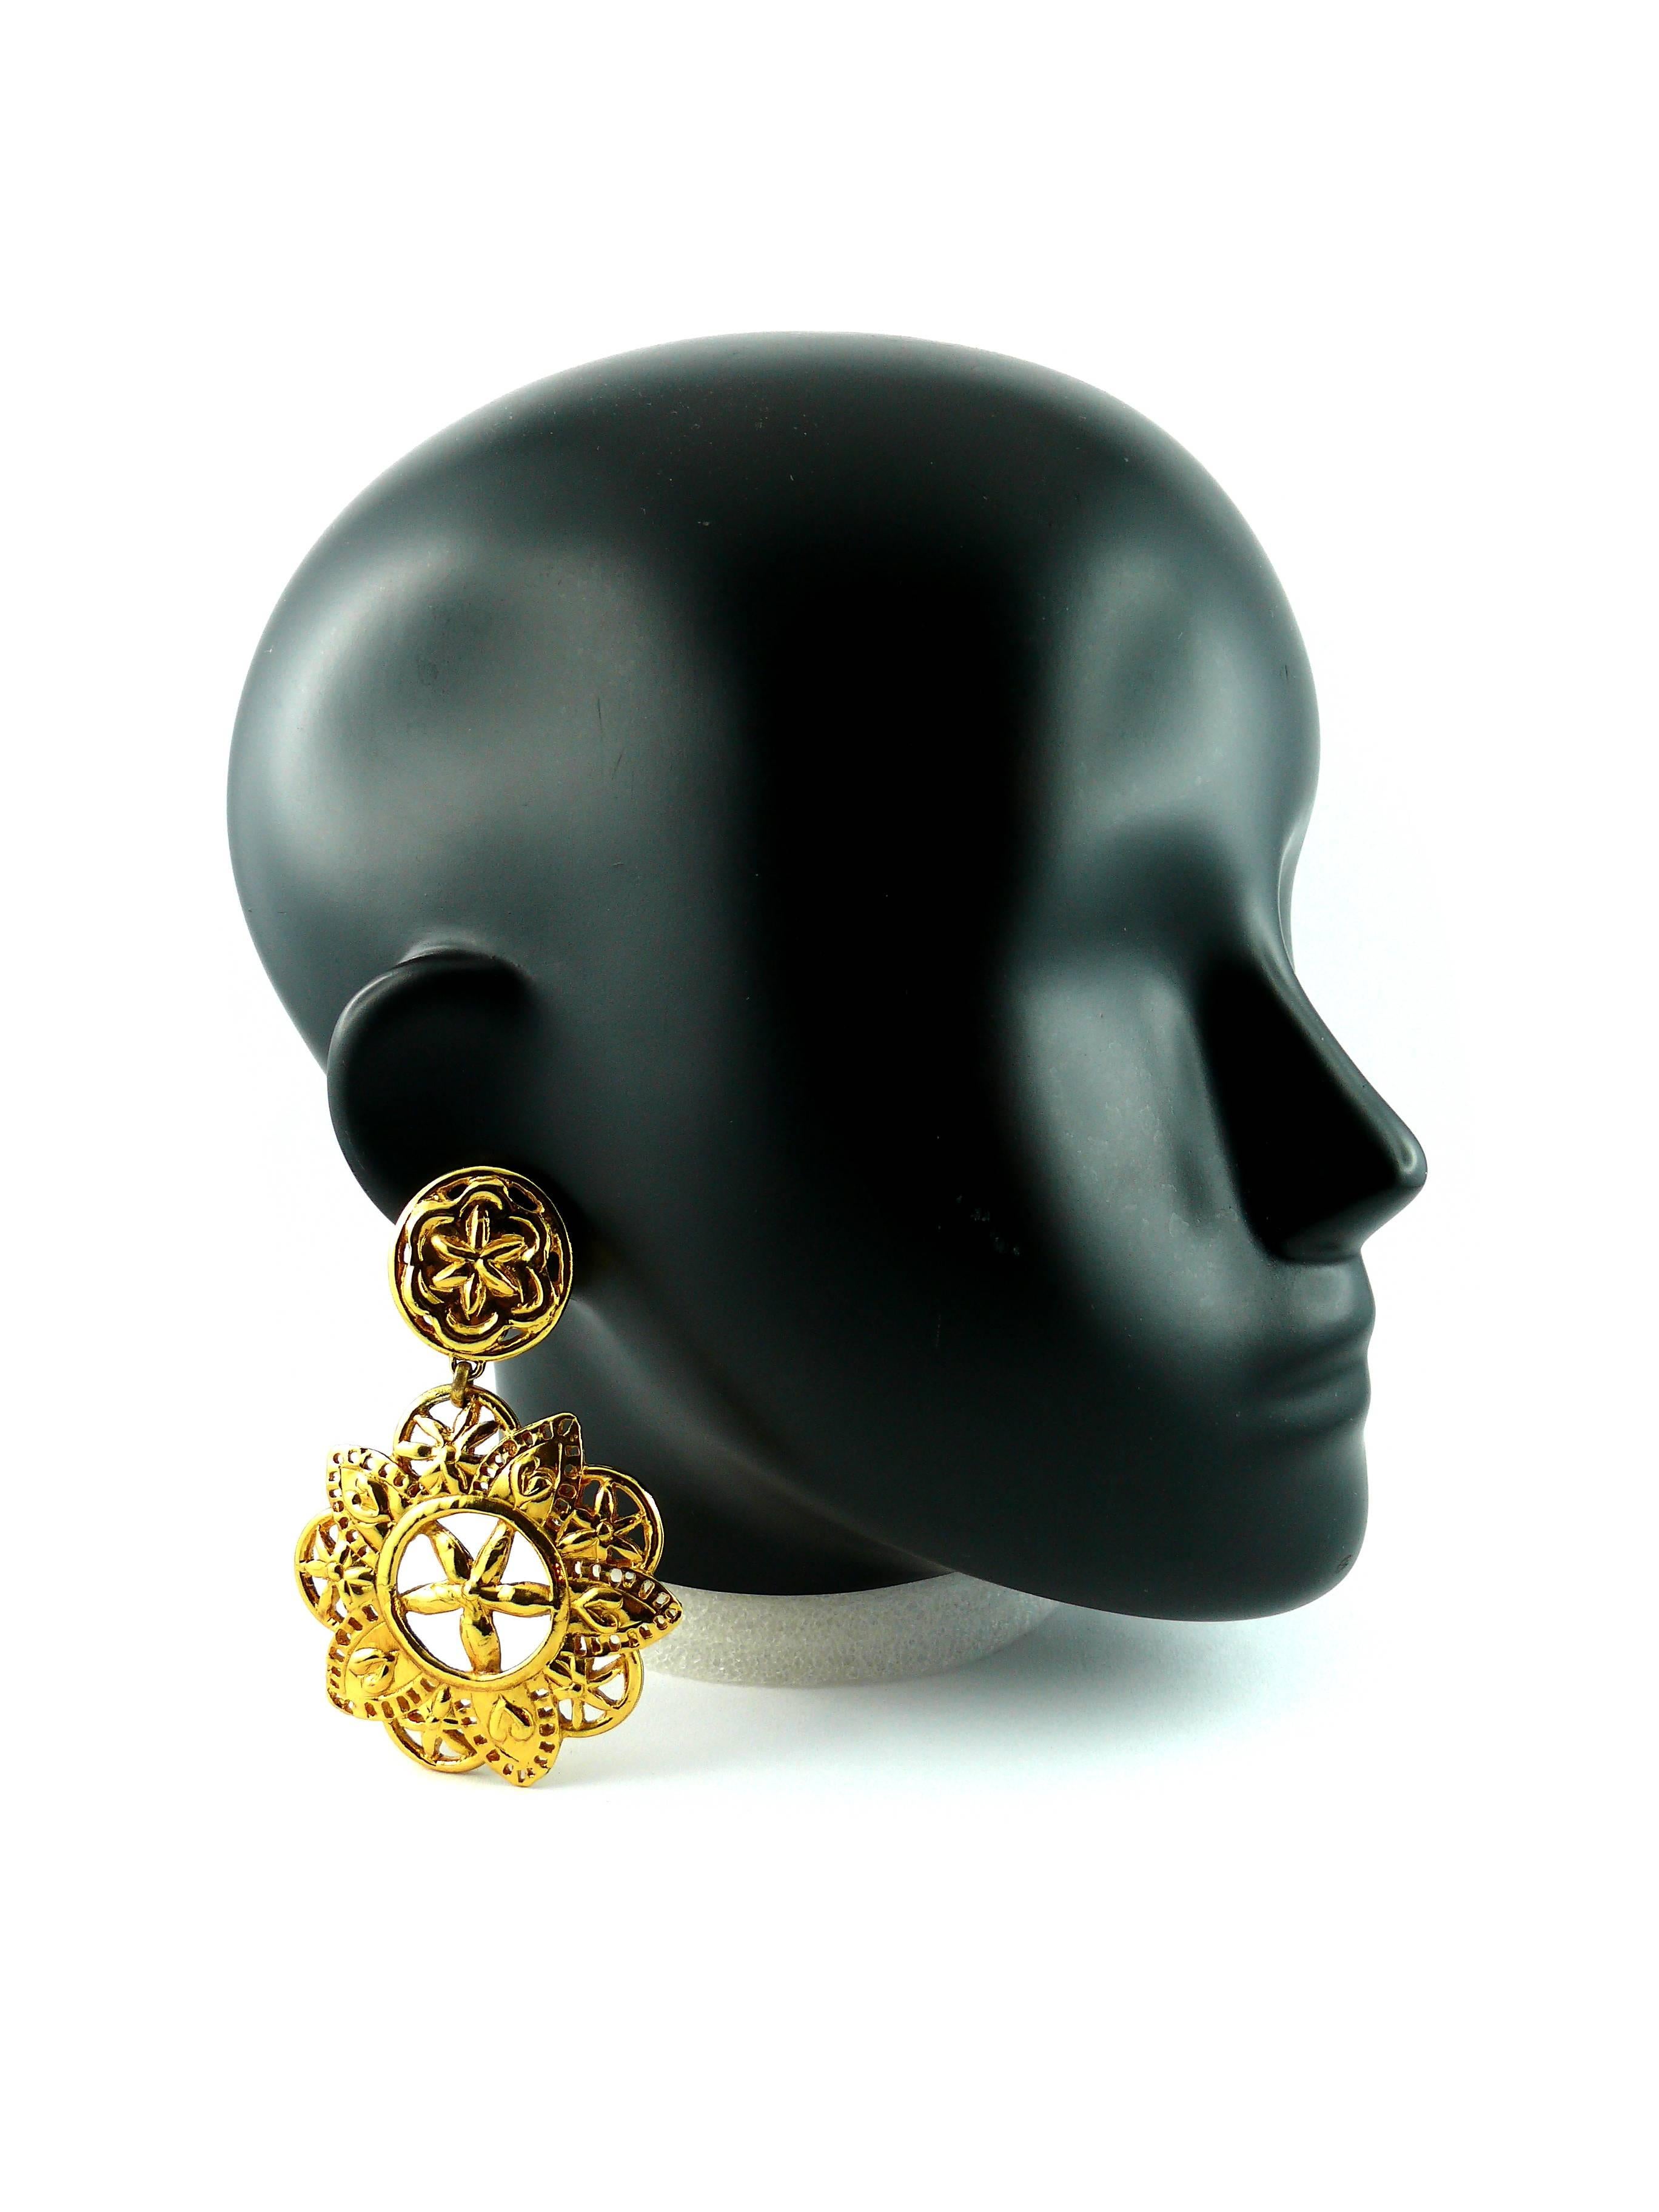 CHRISTIAN LACROIX vintage massive gold toned openwork abstract floral dangling earrings (clip-on).

Marked CHRISTIAN LACROIX CL Made in France.

Comes with original box.

JEWELRY CONDITION CHART
- New or never worn : item is in pristine condition